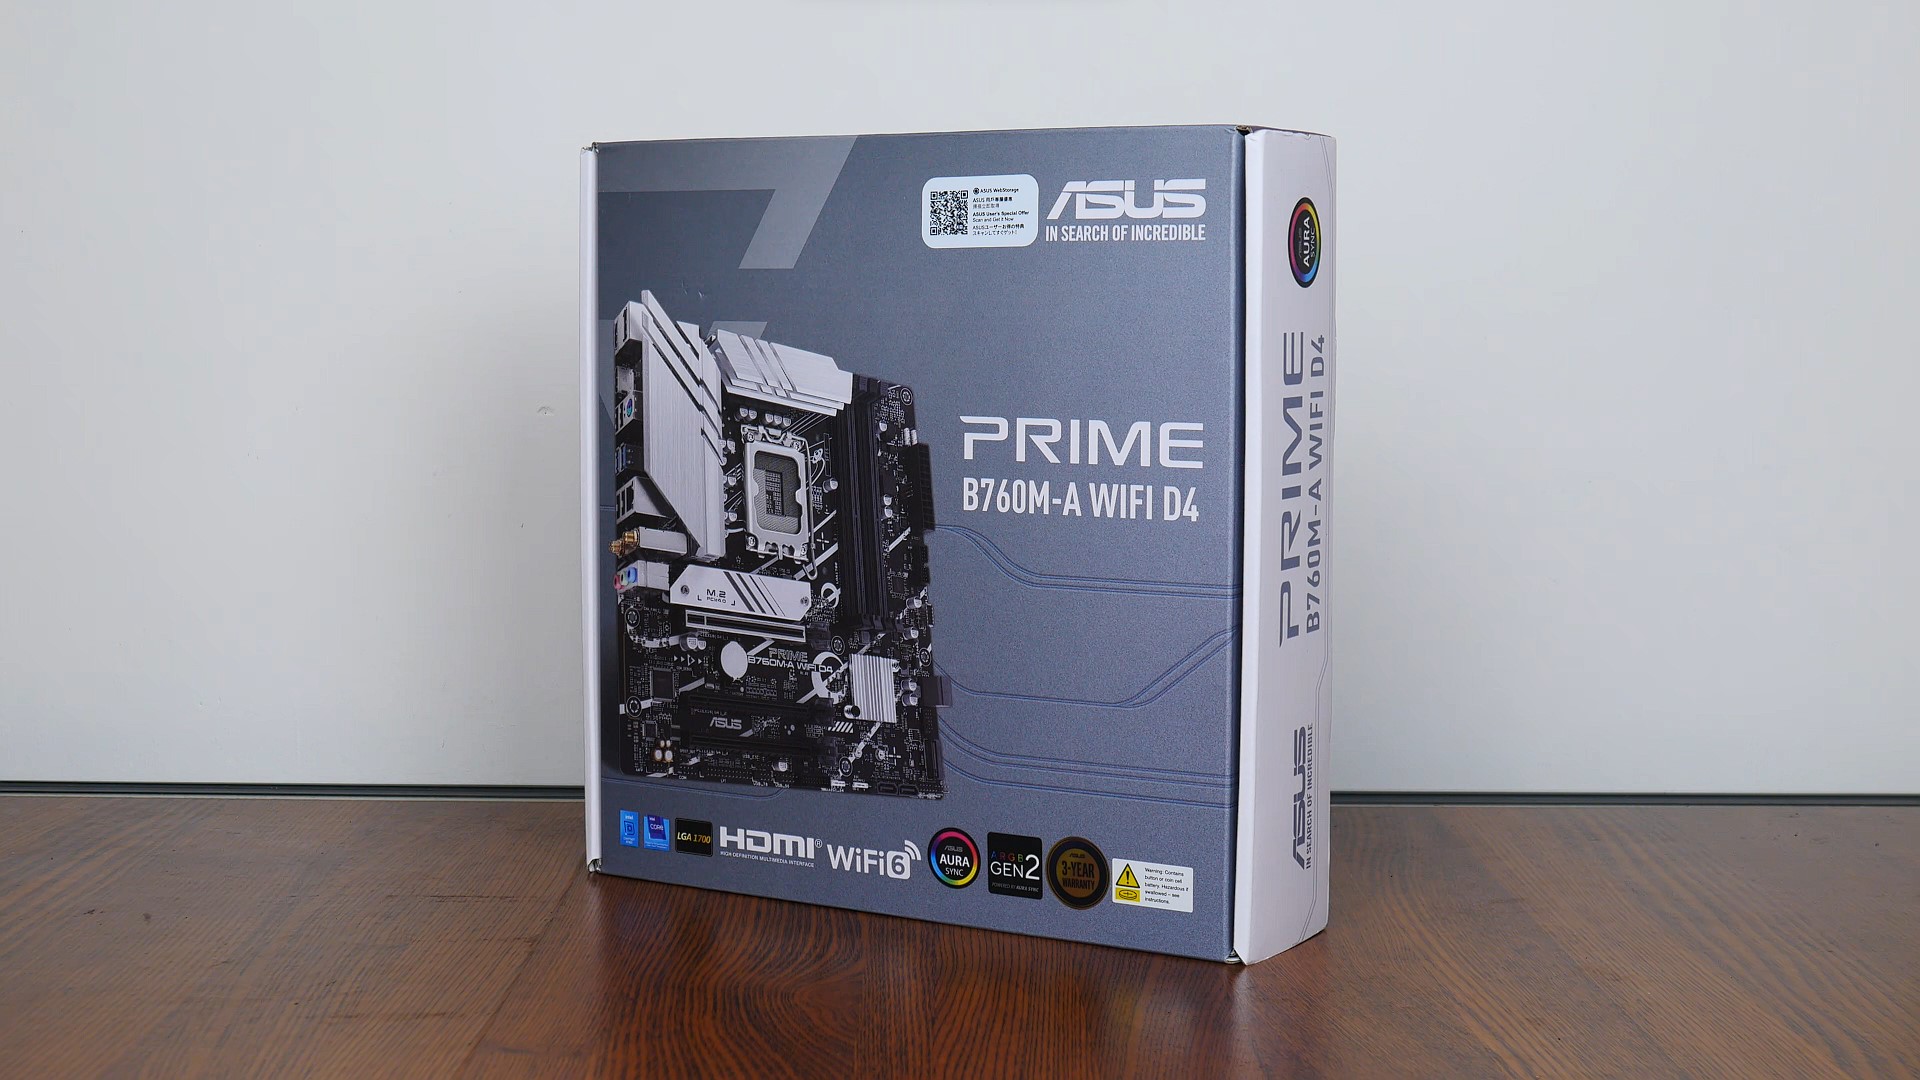 ASUS PRIME B760M-A WIFI D4 Packaging (Front)